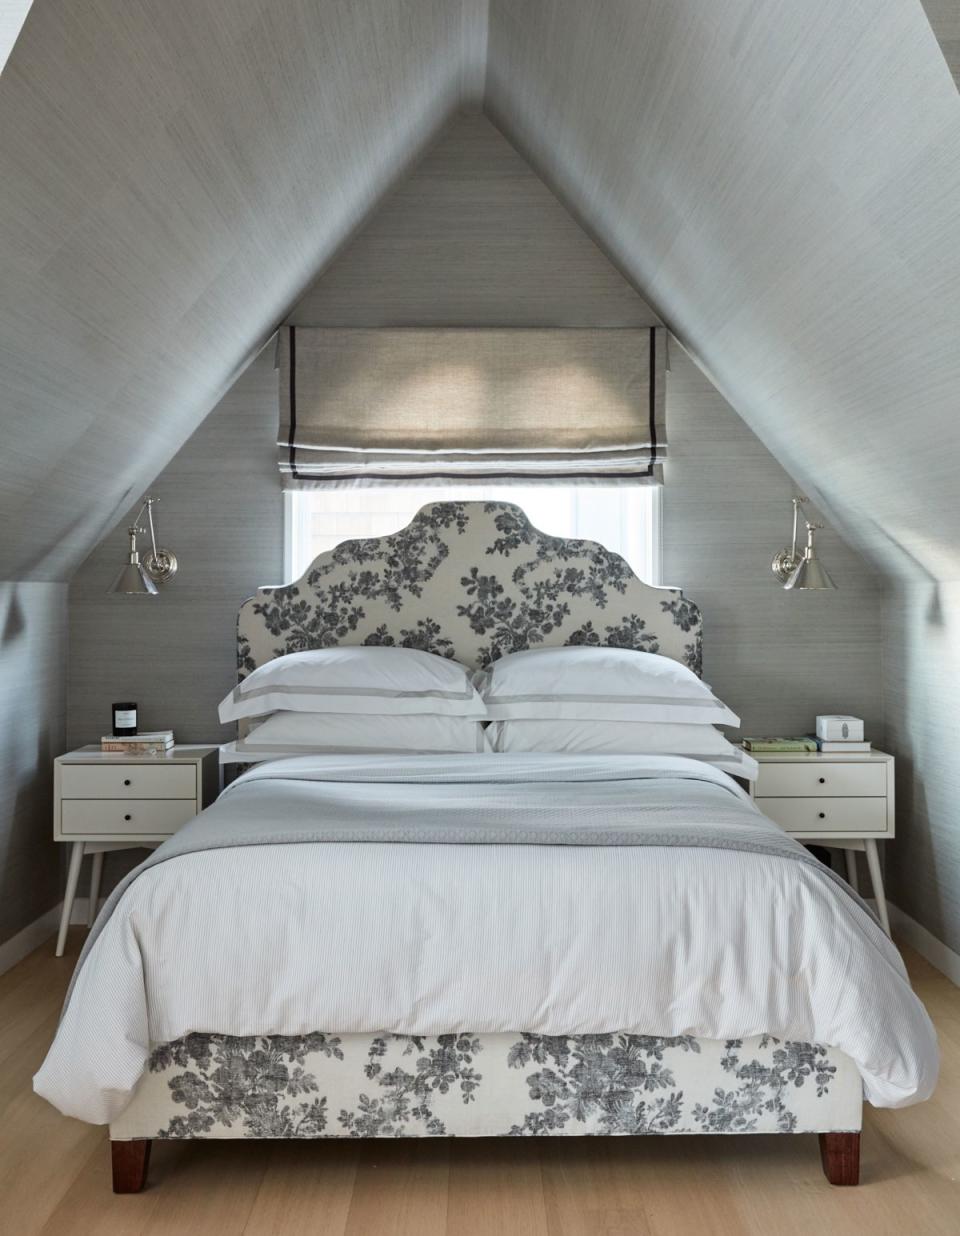 Though the home’s attic space wasn’t intended to be a bedroom, Kwong embraced the original architecture to create a cozy bedroom for the couple’s 17-year-old daughter. With its sloped ceiling, silk Ralph Lauren Home wallpaper, and romantic, floral-upholstered bed frame, this space turned out to be Kwong’s favorite. “It’s sort of my teenage self’s dream bedroom,” she says.